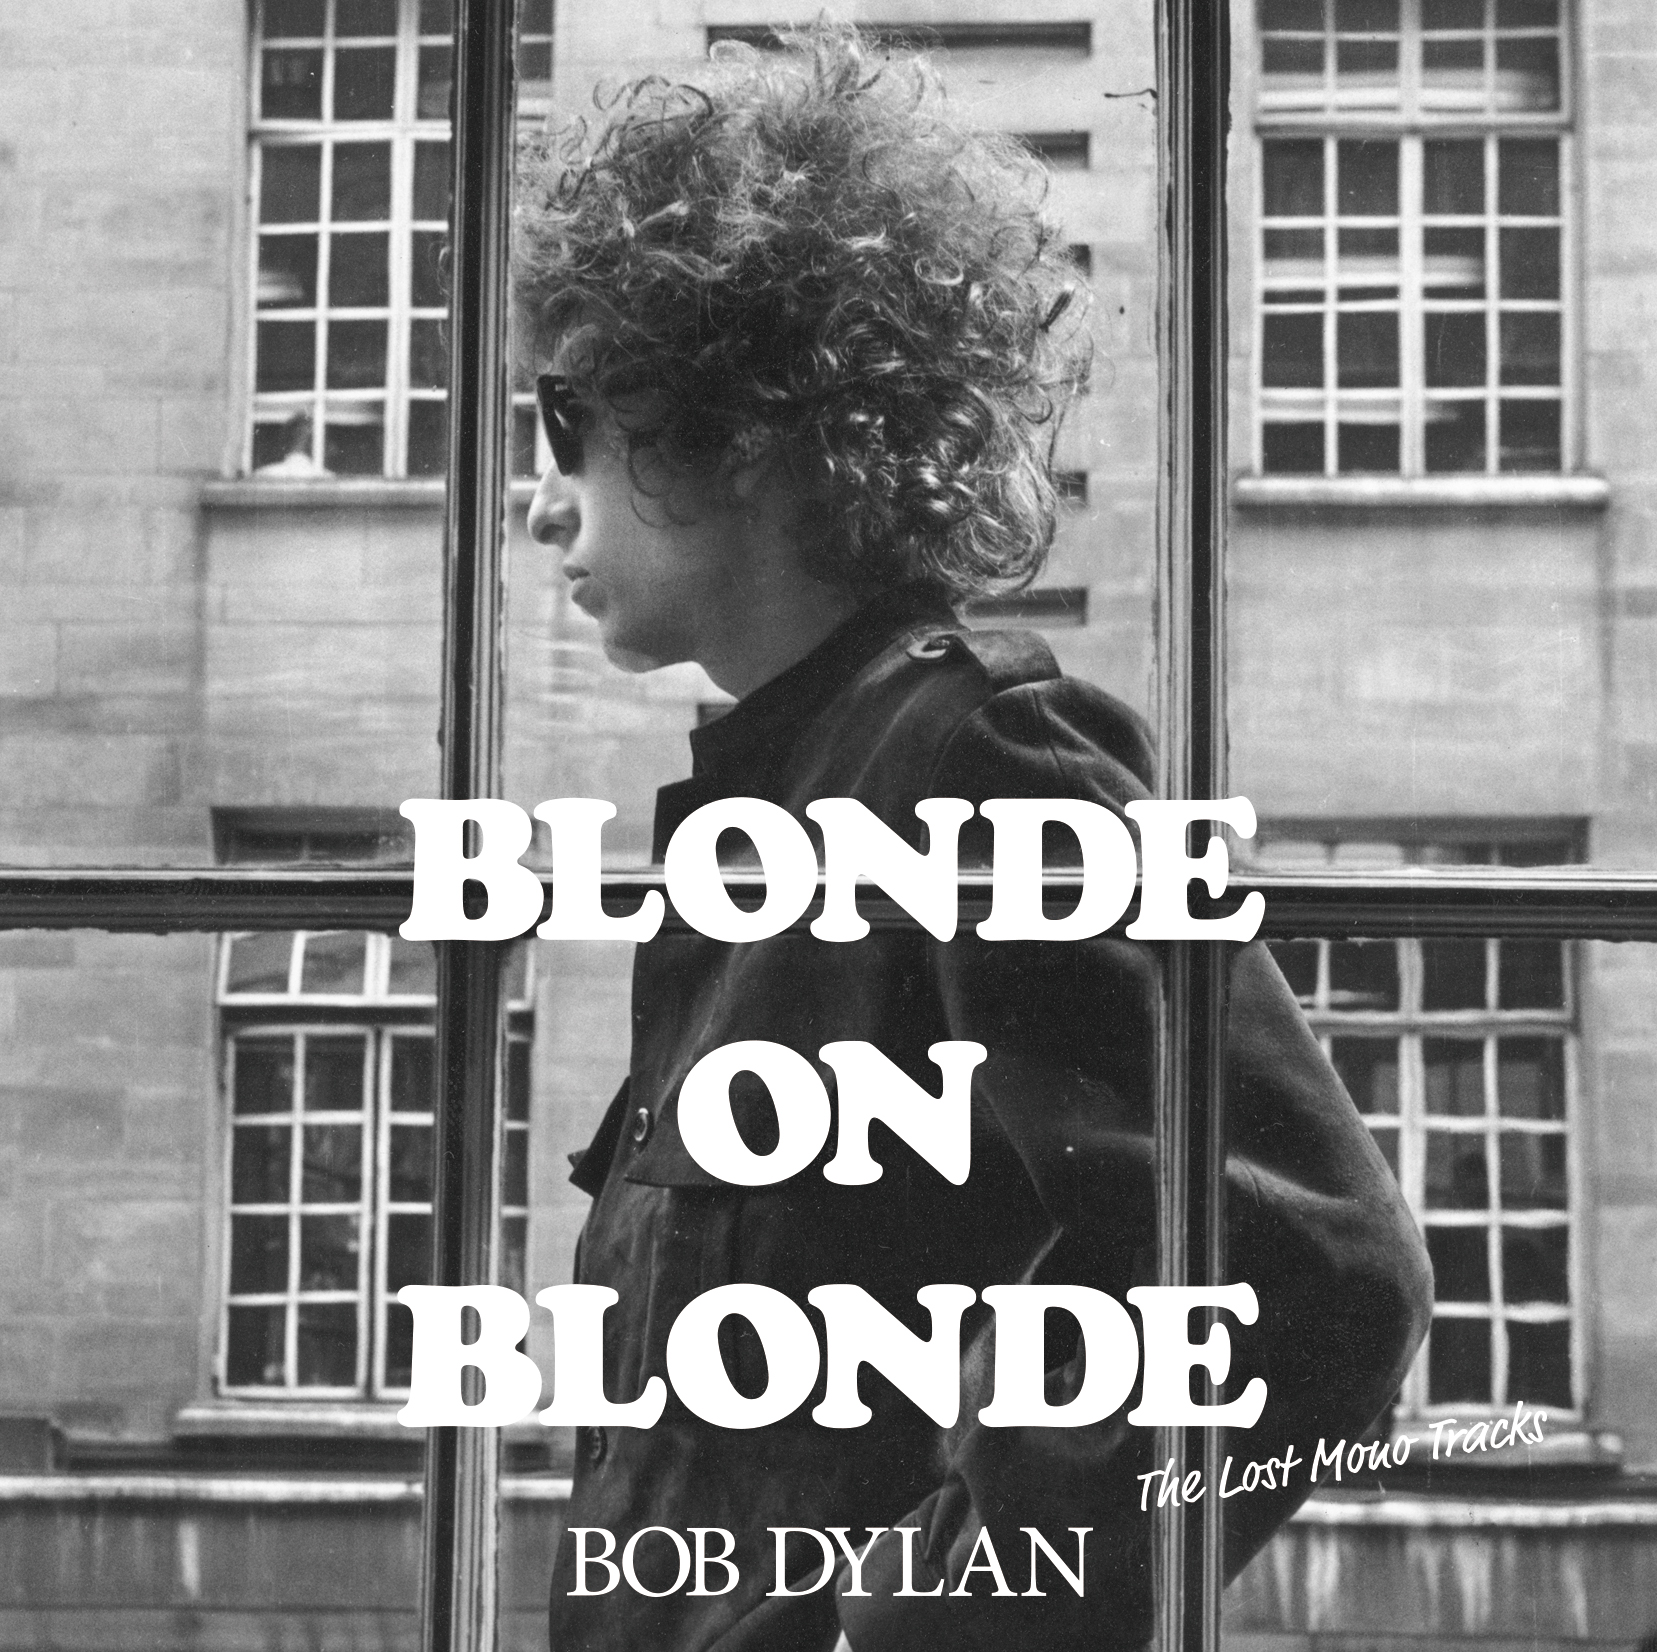 BOB DYLAN / BLONDE ON BLONDE ＜The Lost Mono Tracks＞